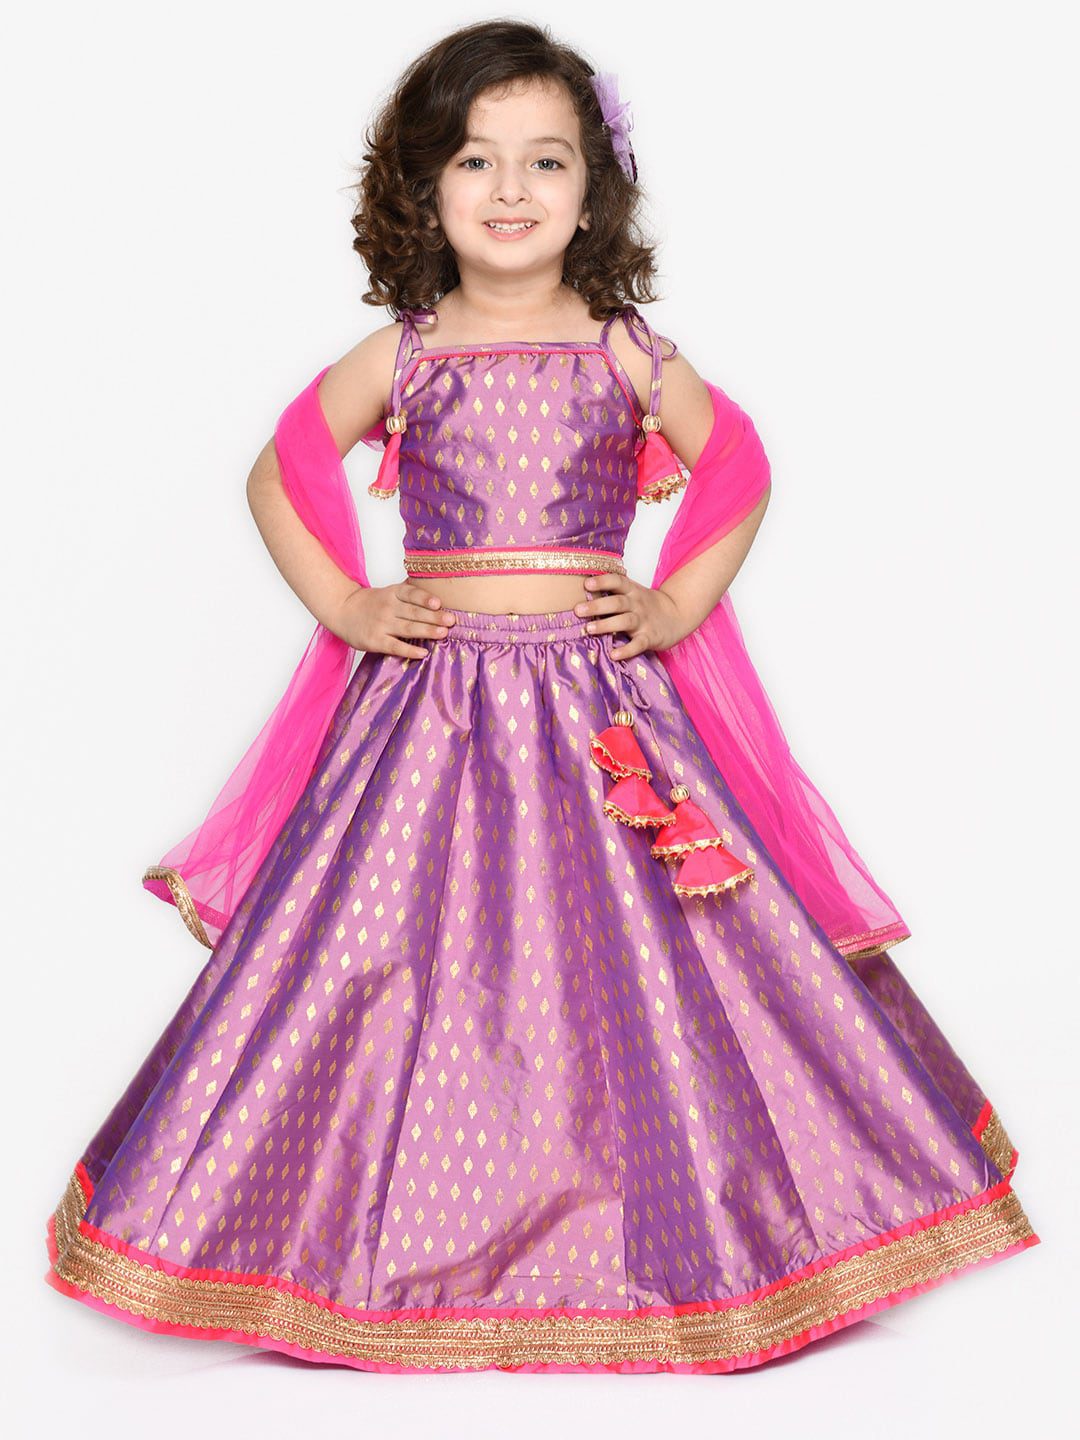 Buy The Fashion Prime Girl's Net and Satin Semi-Stitched girl's Best Lehenga  Choli for Girls-3-16 Year (3-4 Years, Pink) at Amazon.in